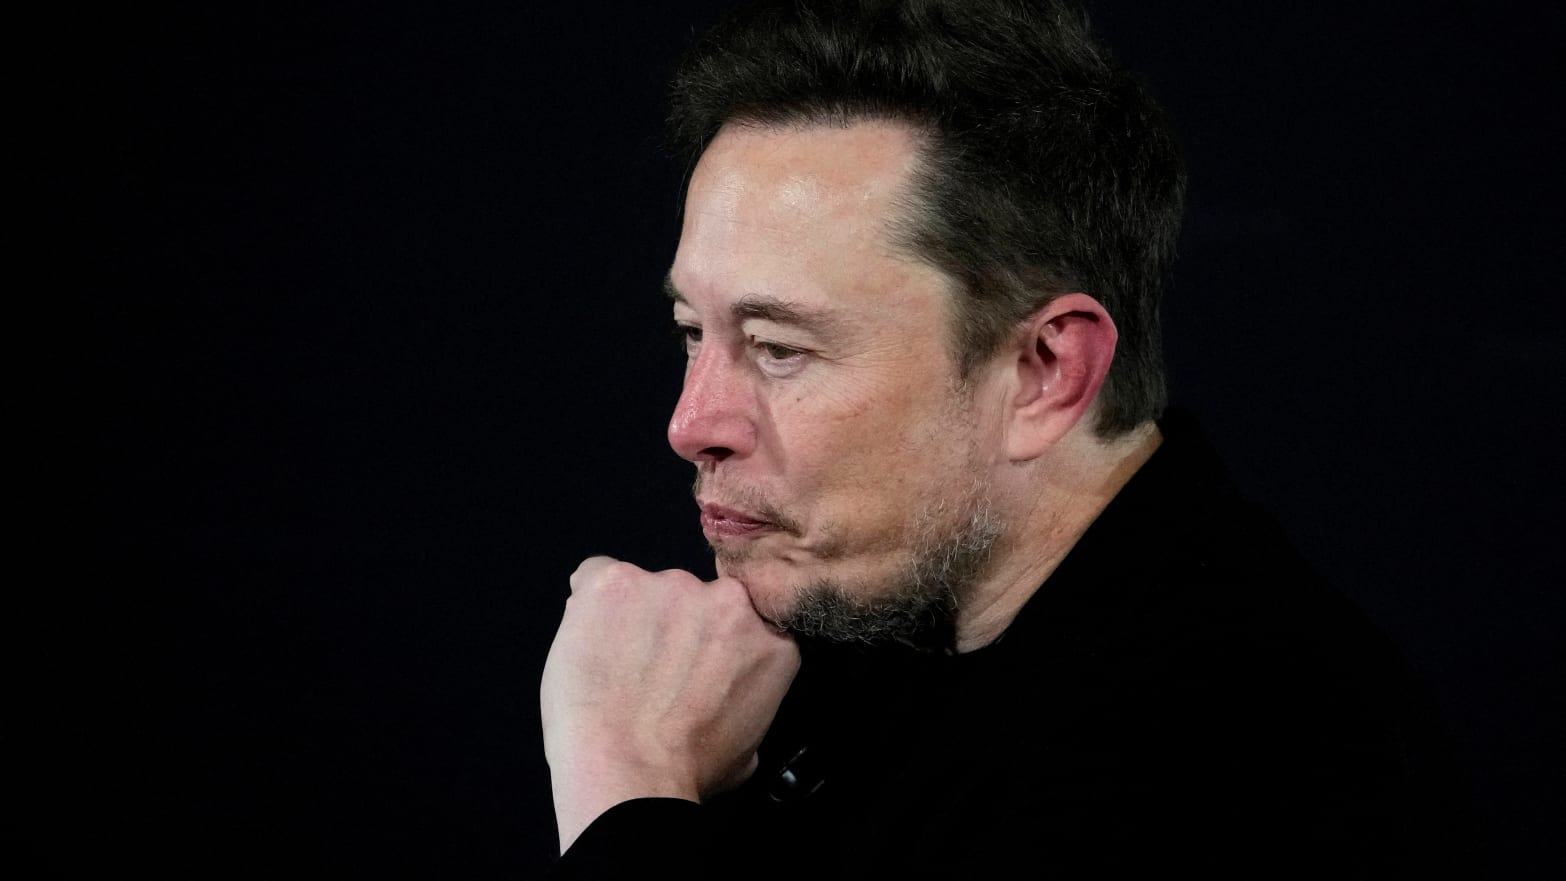 OpenAI has hit back at Elon Musk’s lawsuit, publishing emails which purport to show that he backed the artificial intelligence company creating a for-profit entity. 